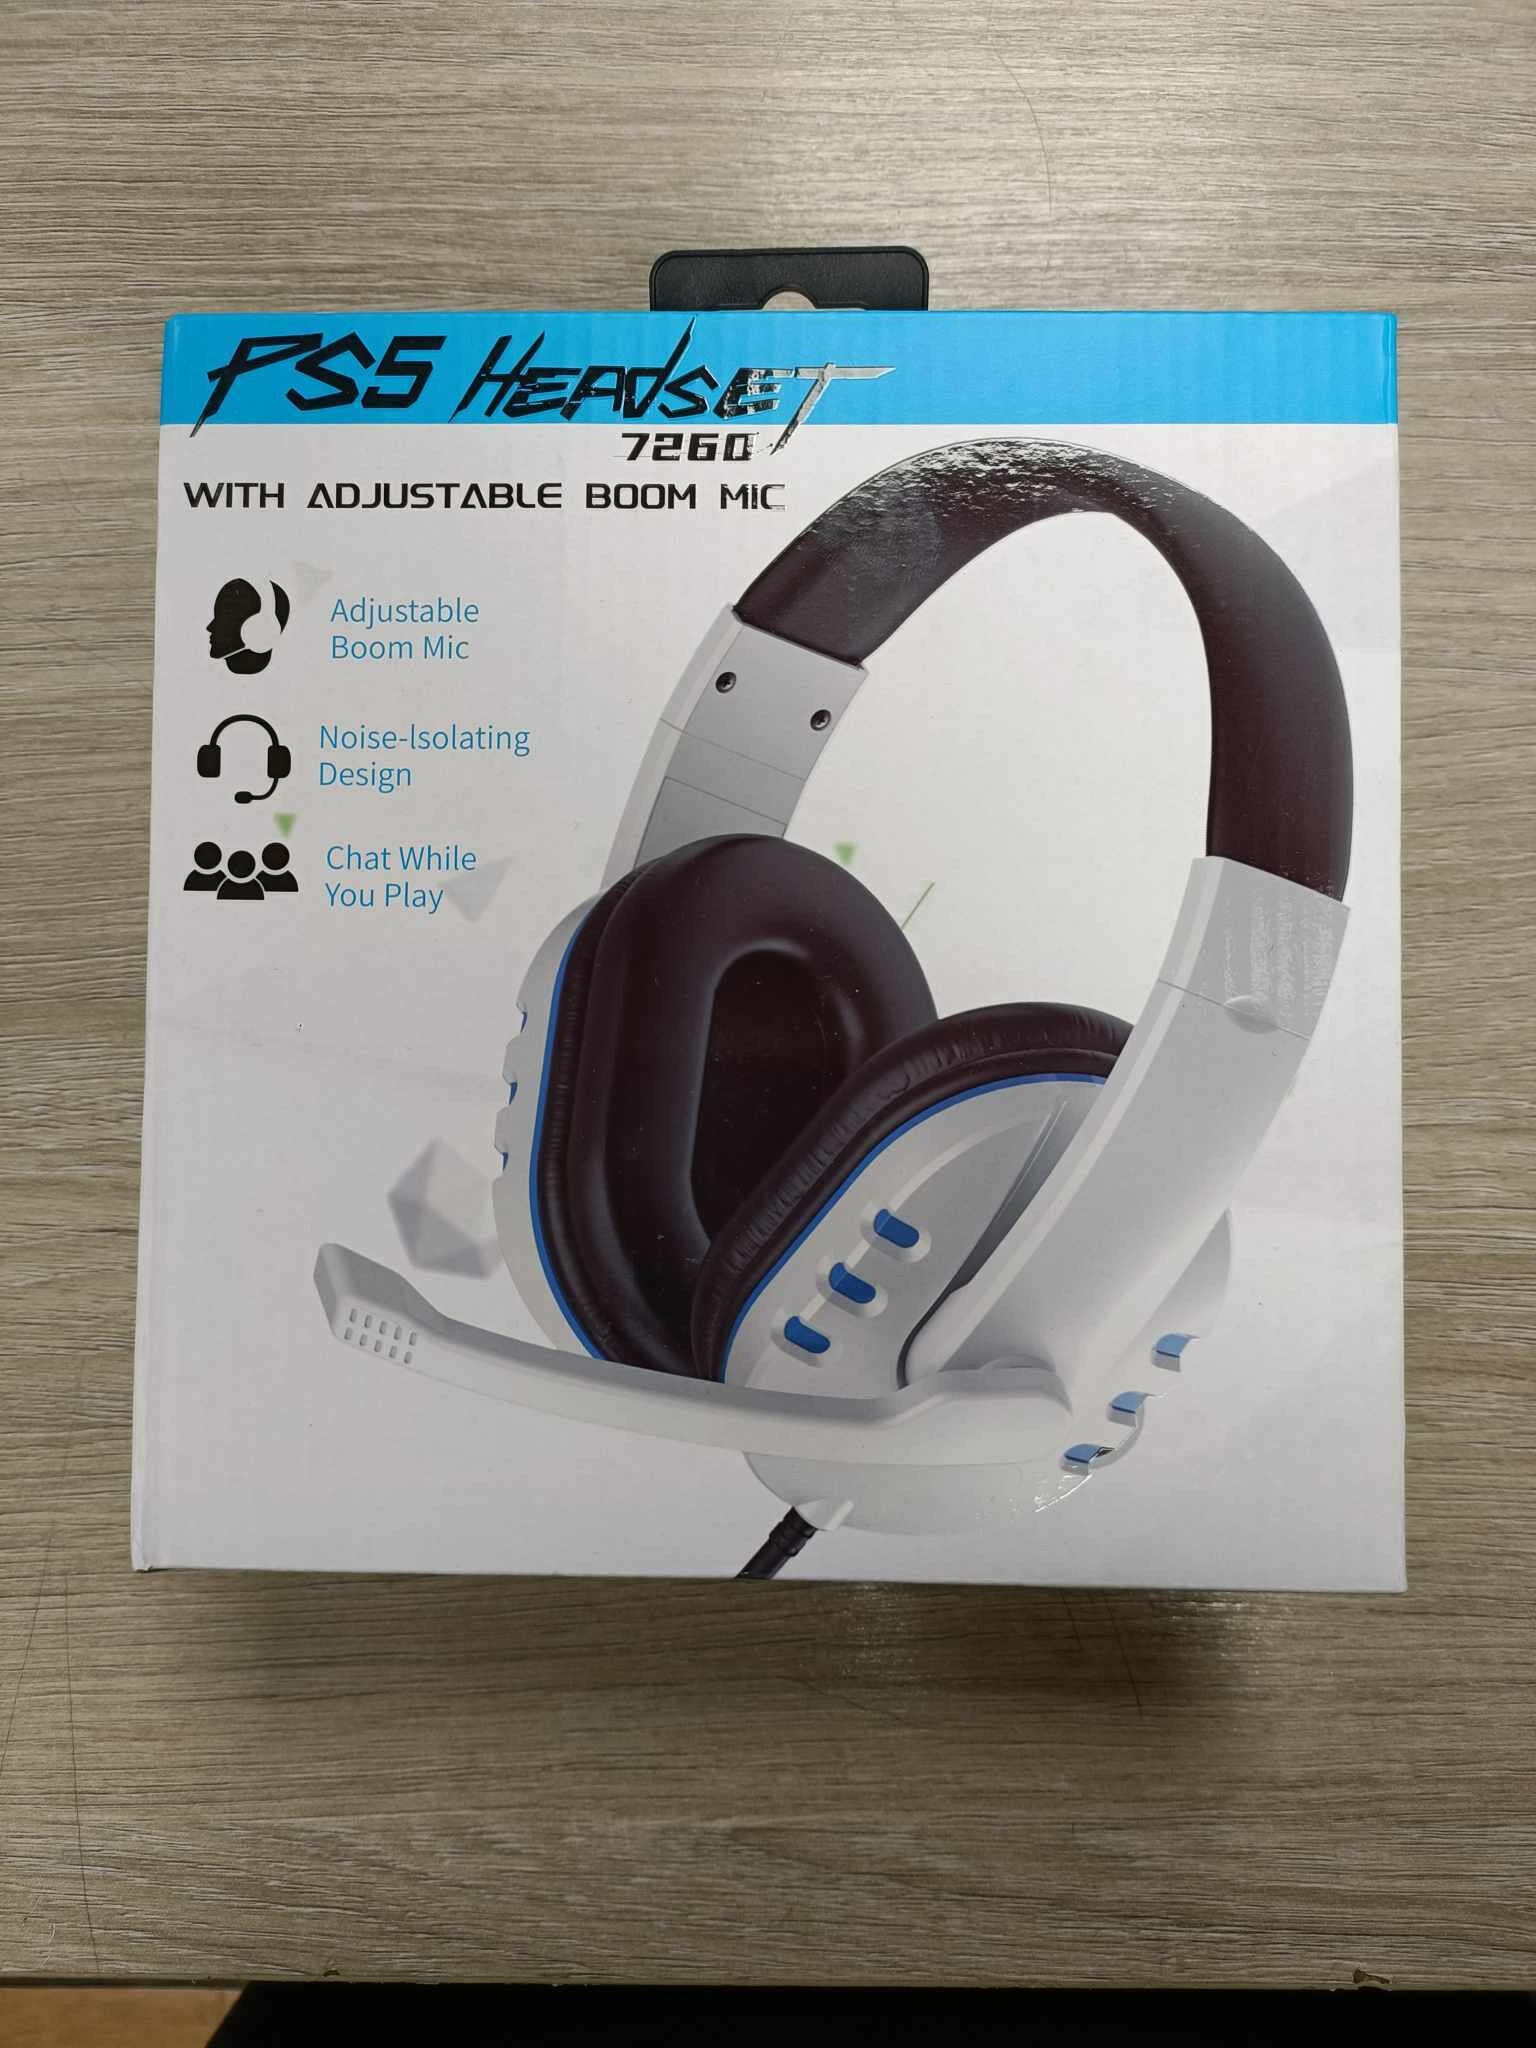 PS5 Headset 7260